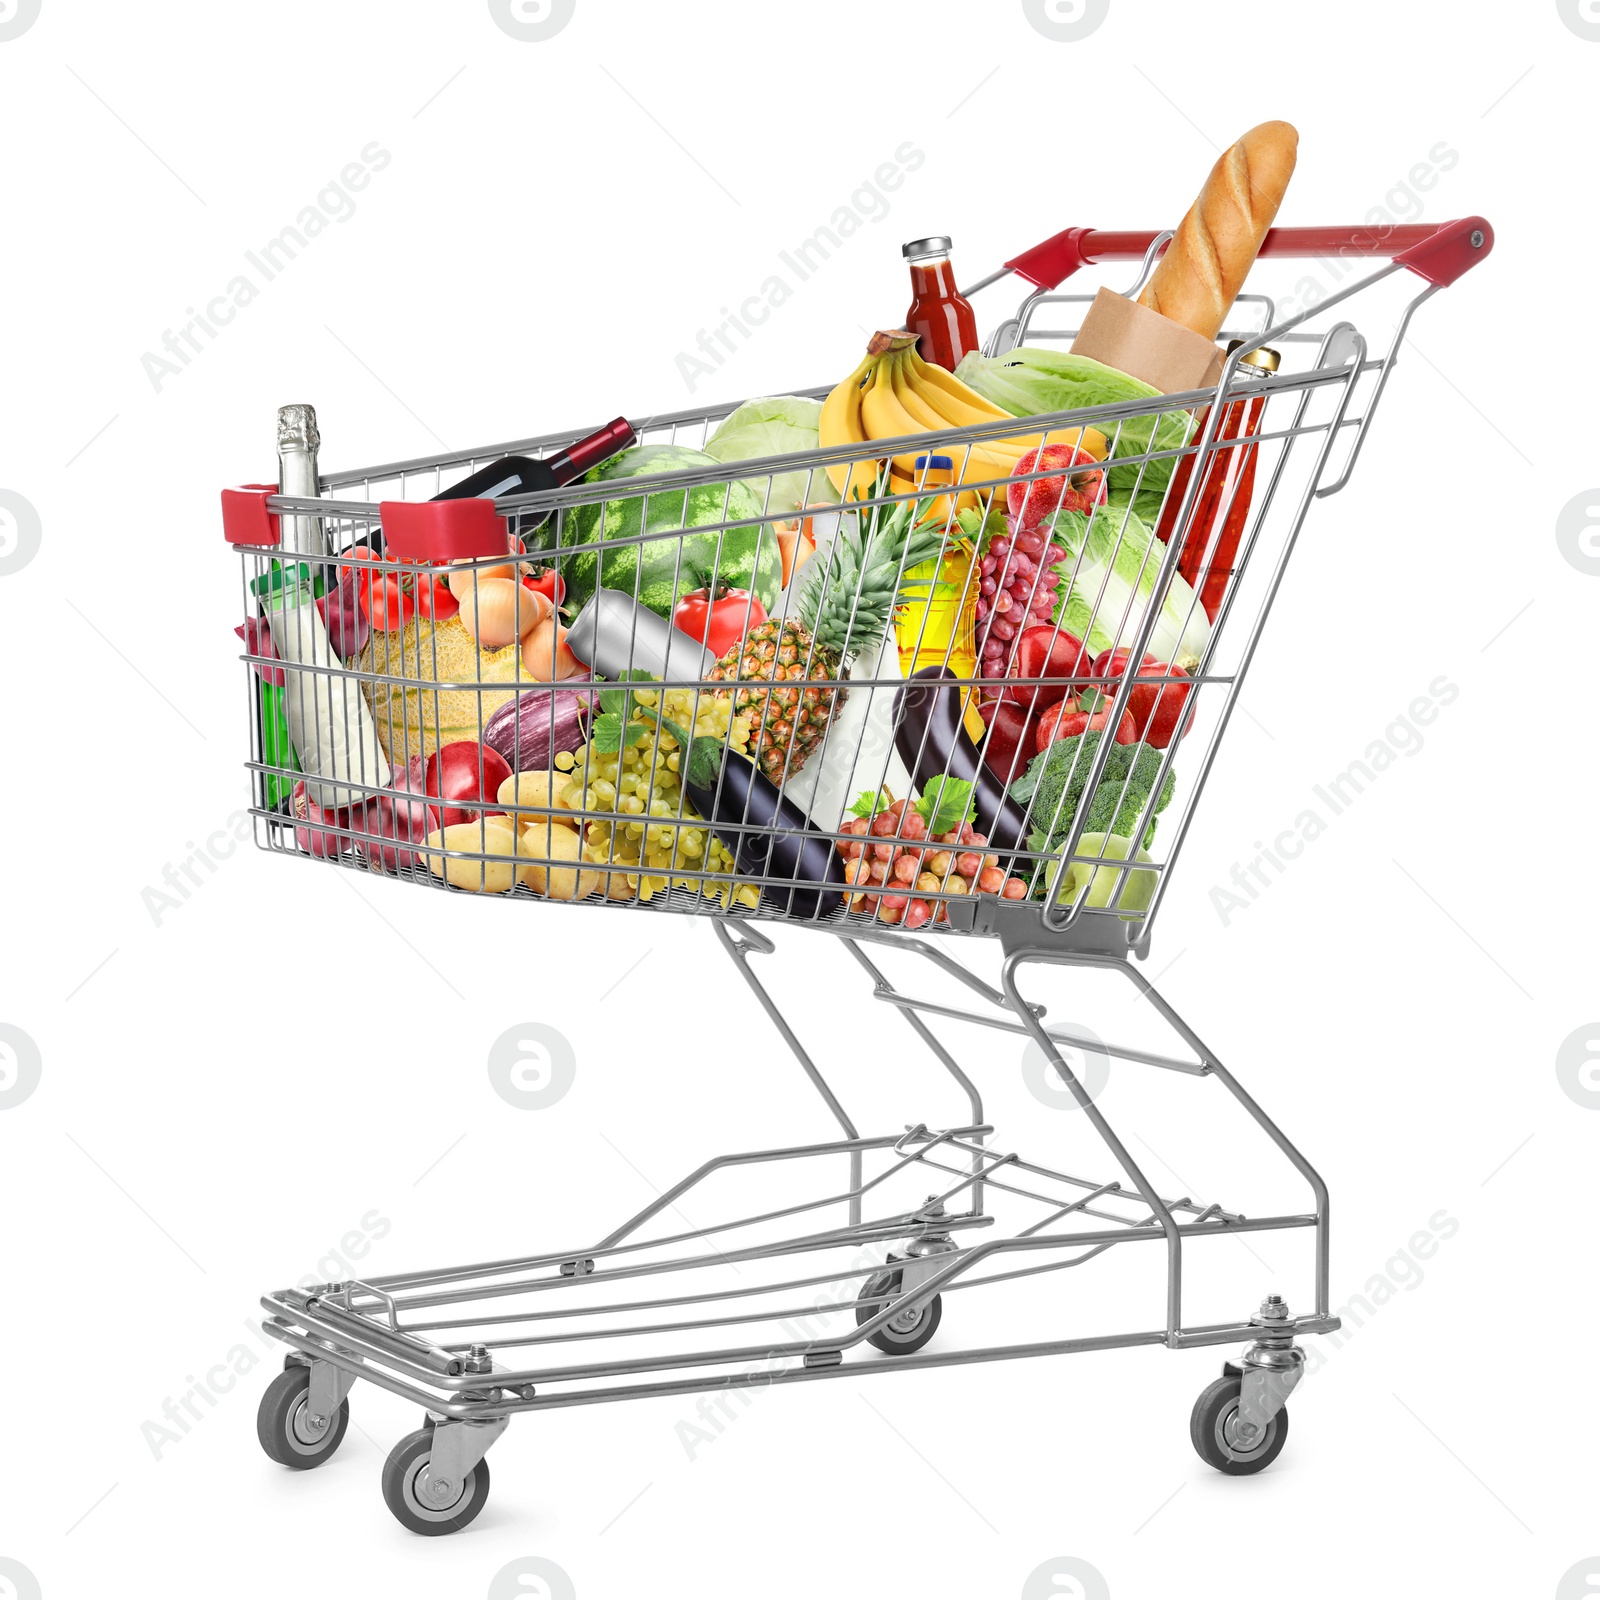 Image of Shopping cart with groceries on white background